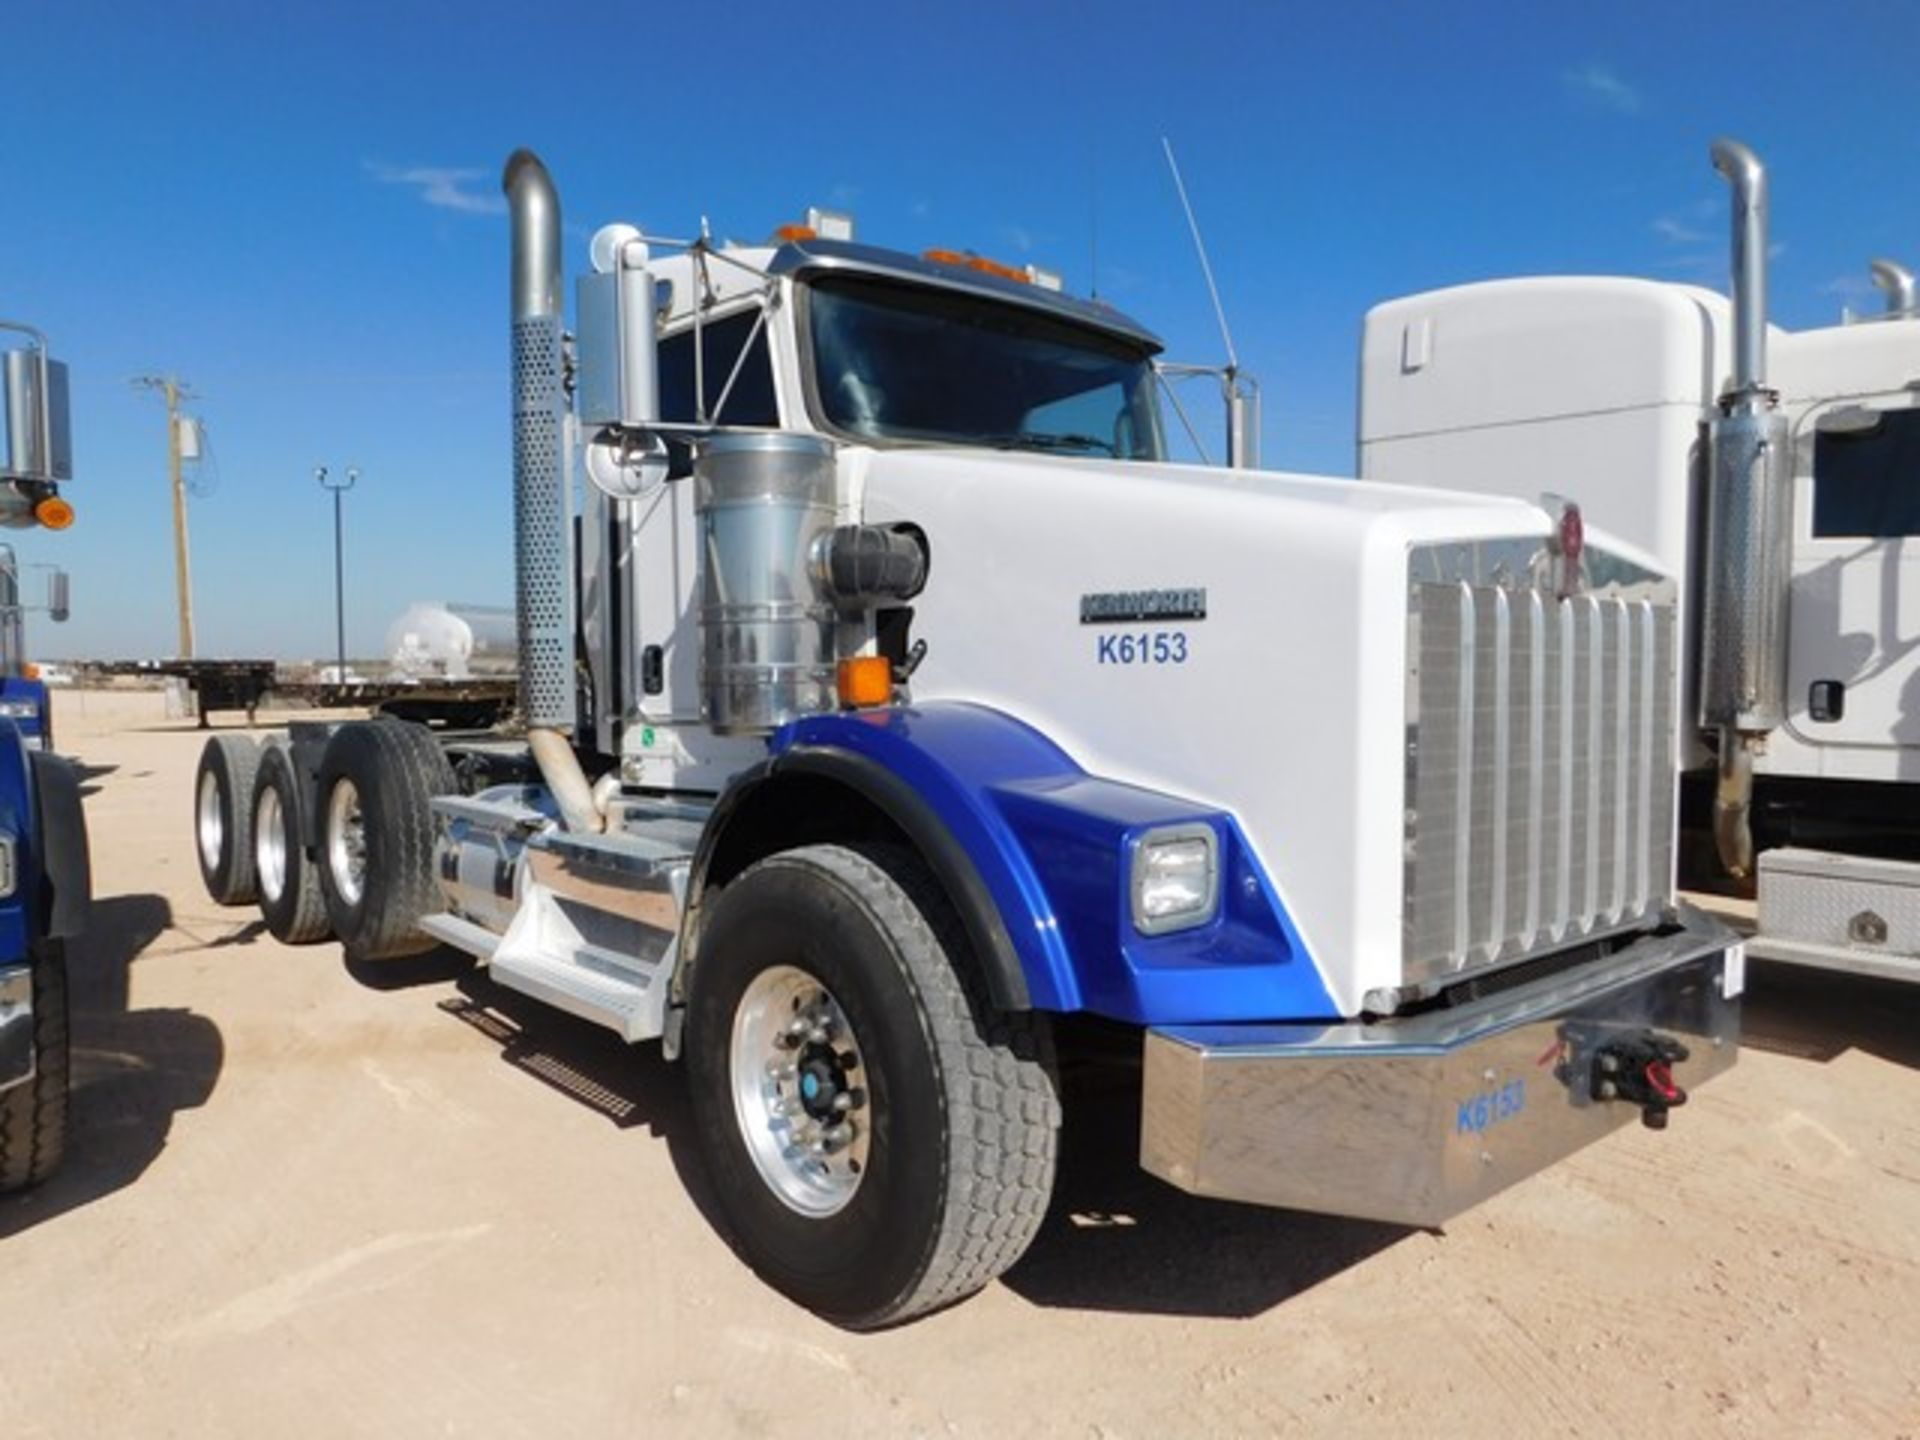 Located in YARD 1 - Midland, TX (2262) (X) 2012 KENWORTH T800 4 AXLE DAY CAB HAUL TRUCK, VIN- - Image 2 of 8